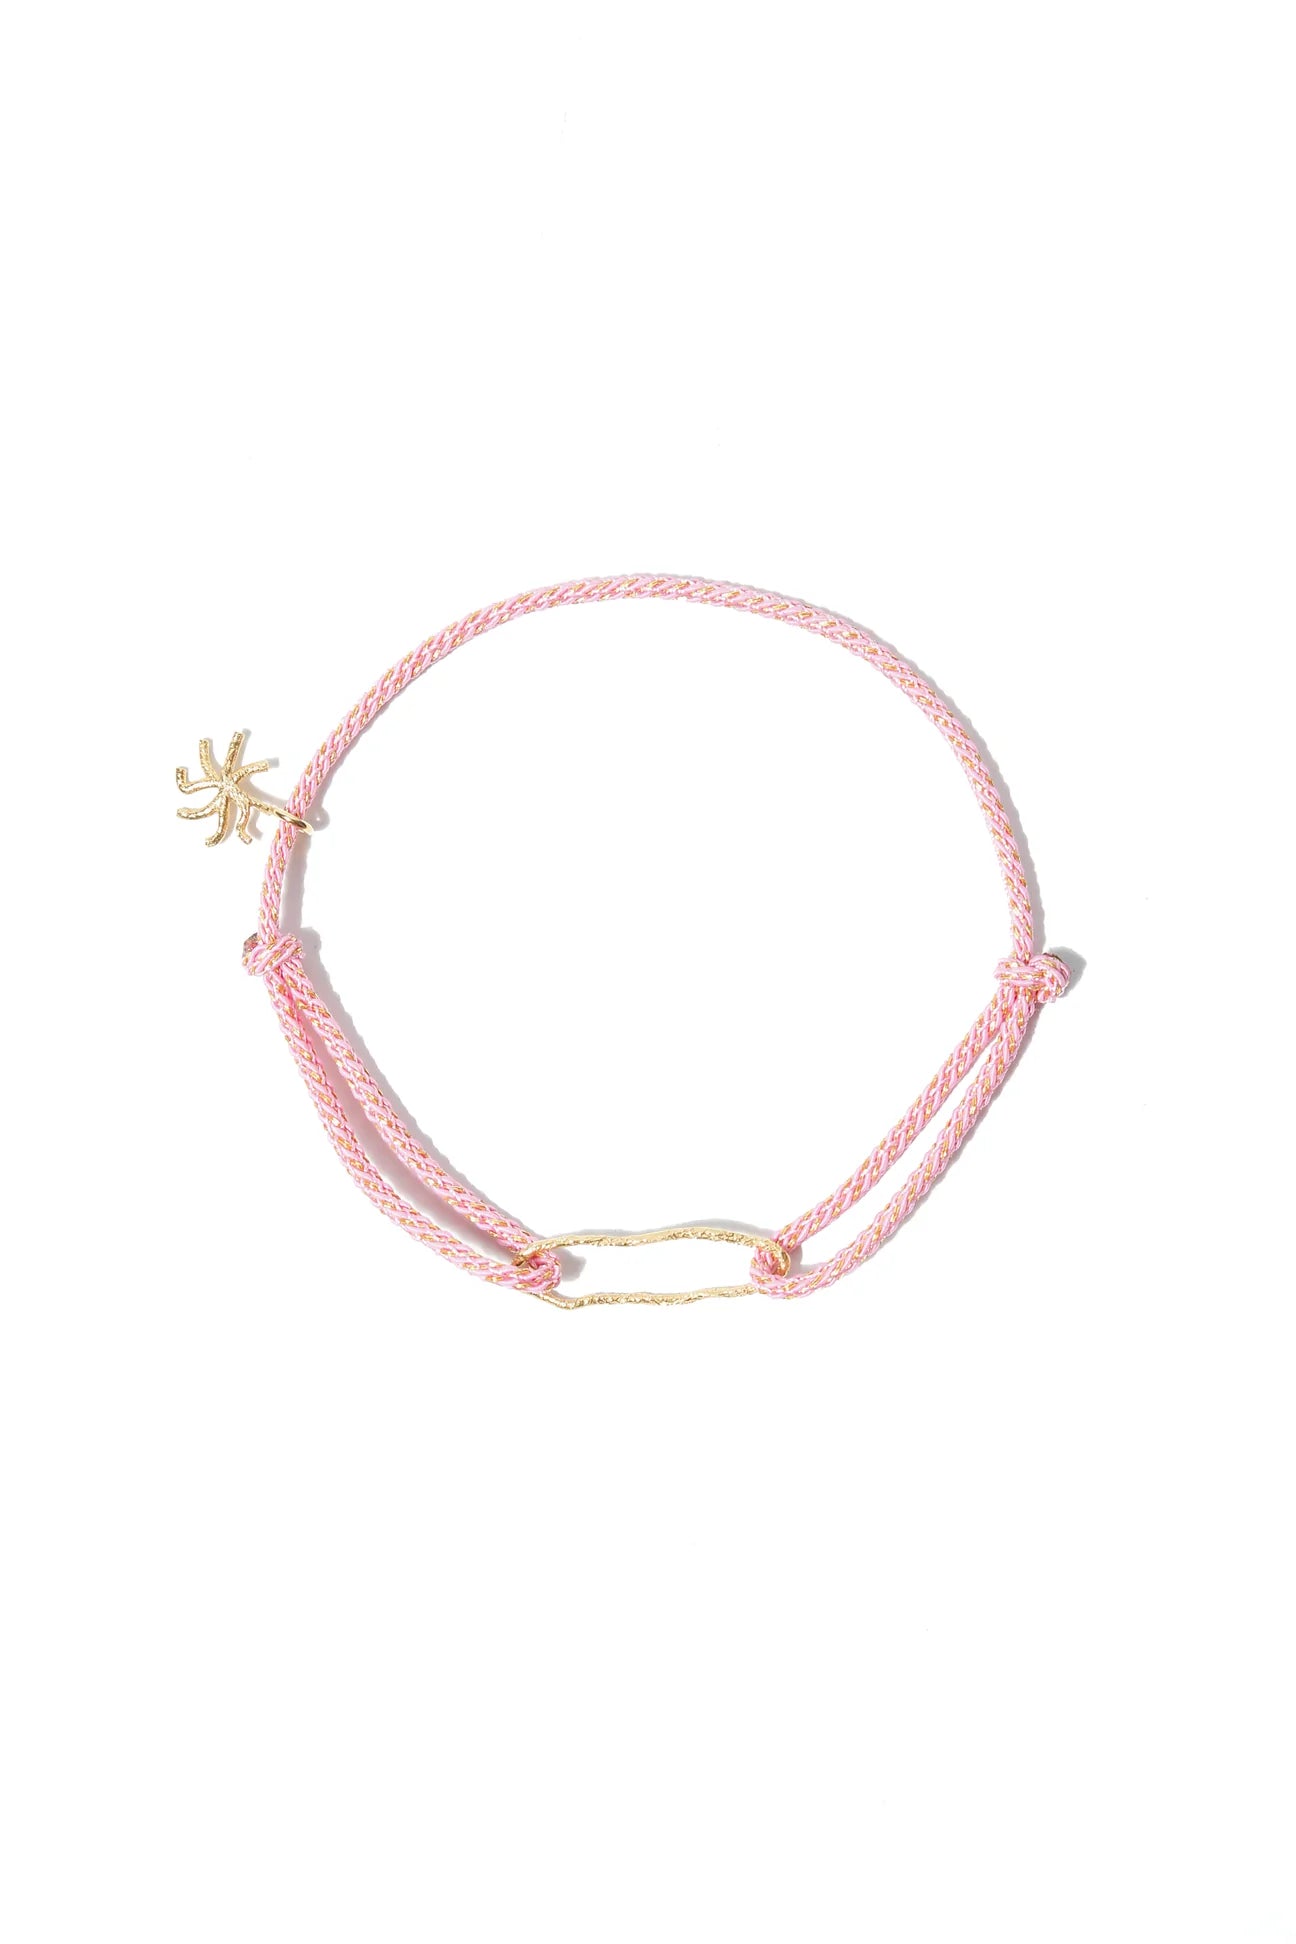 Star and Paperclip Bracelet II